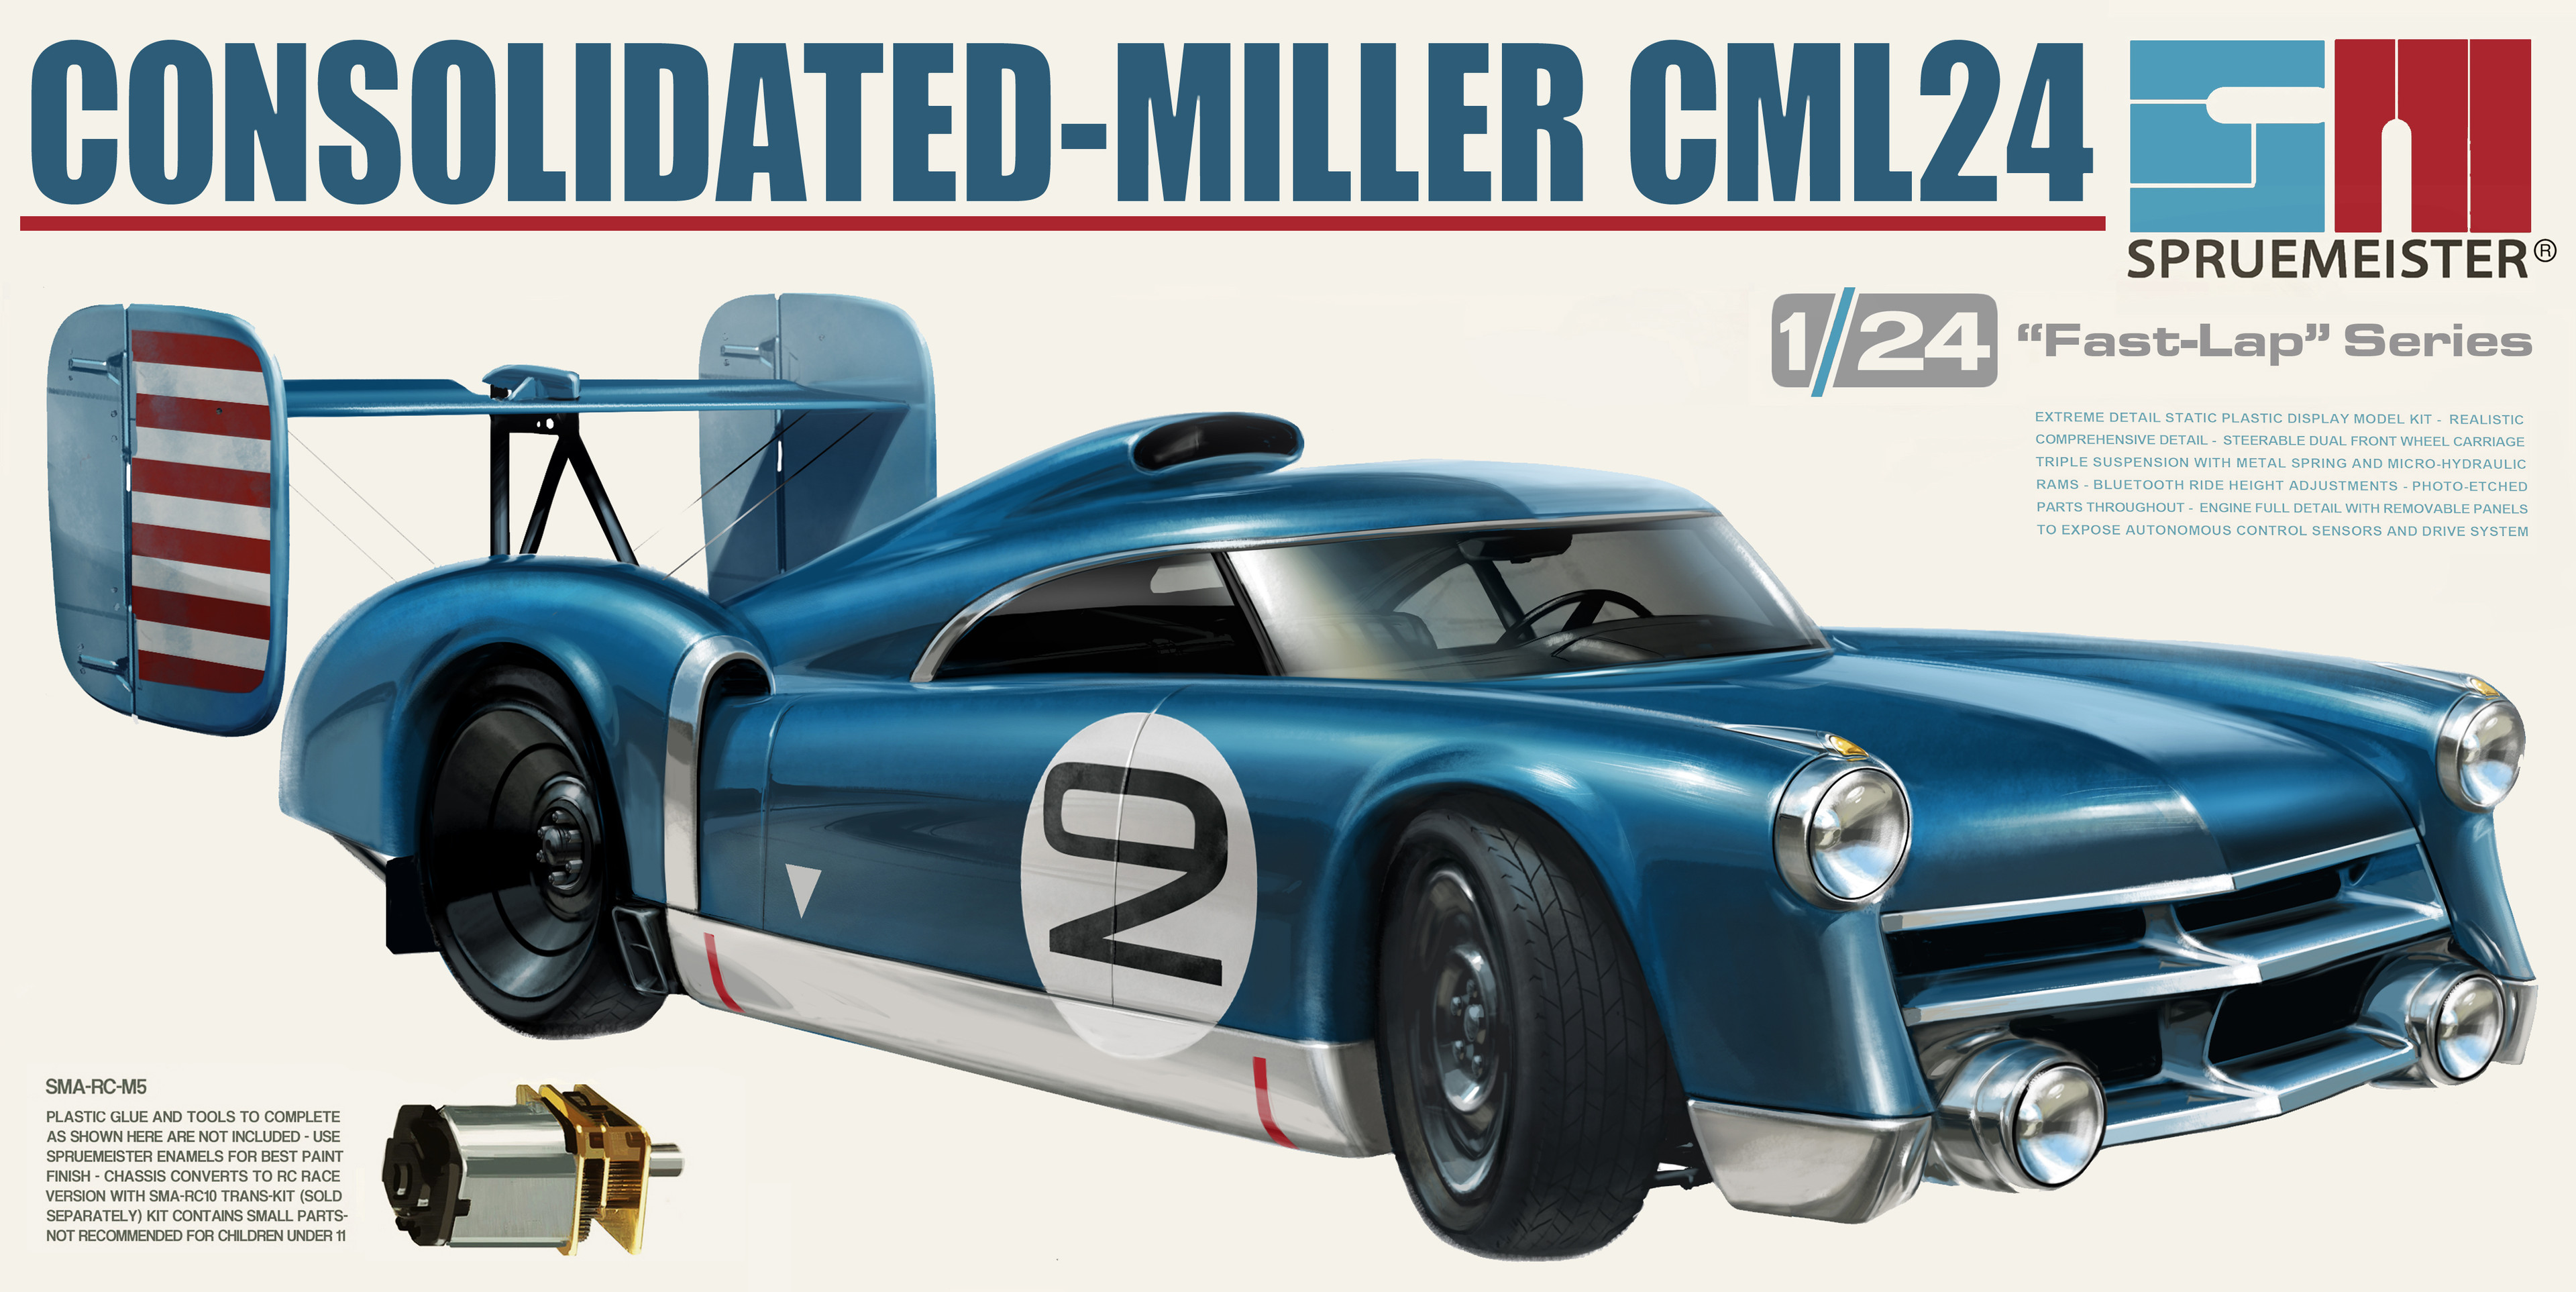 Consolidated-Miller CML24 Final. 